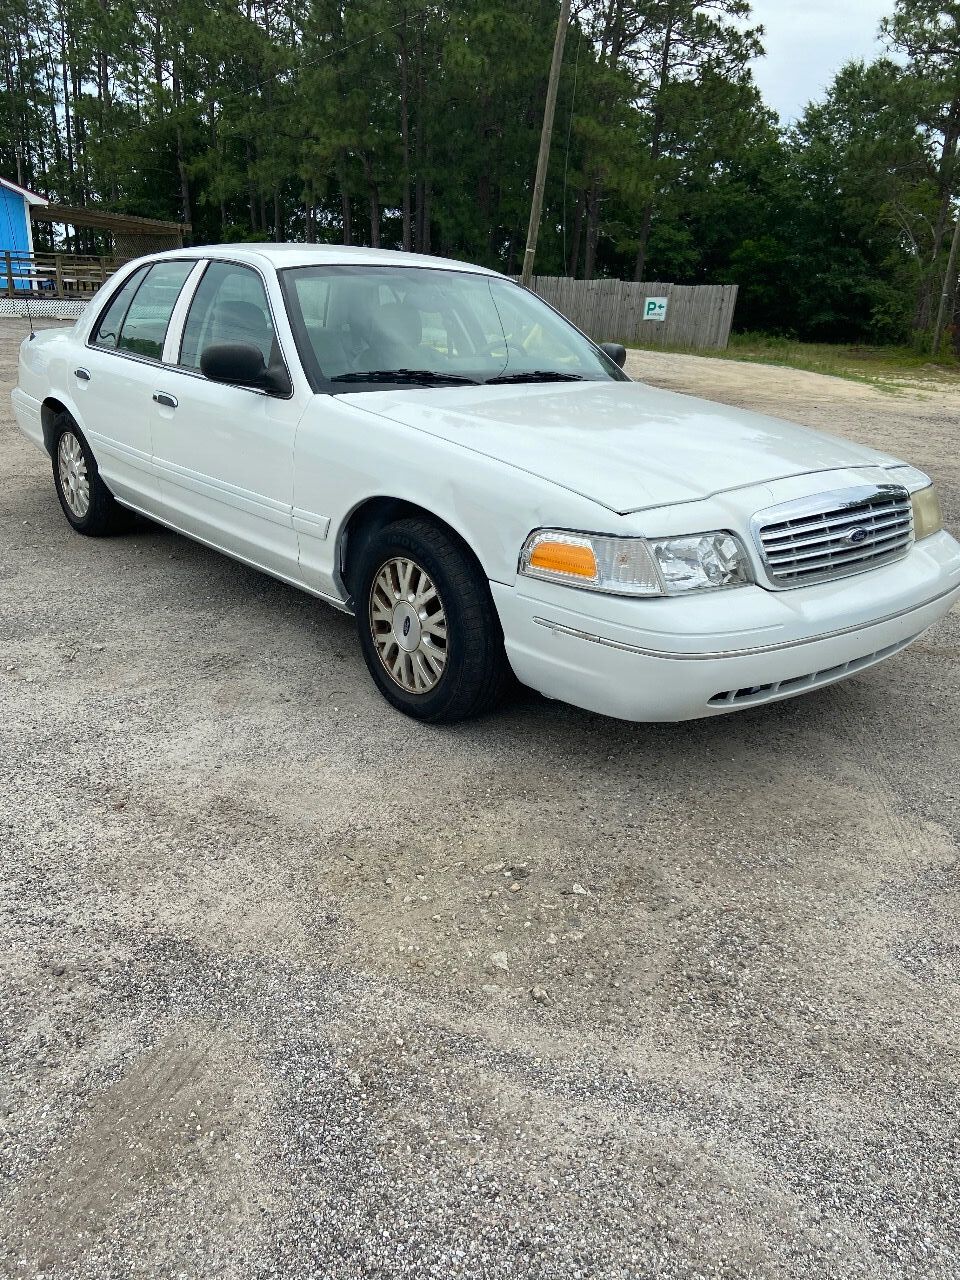 2005 Ford Crown Victoria For Sale - Carsforsale.com®